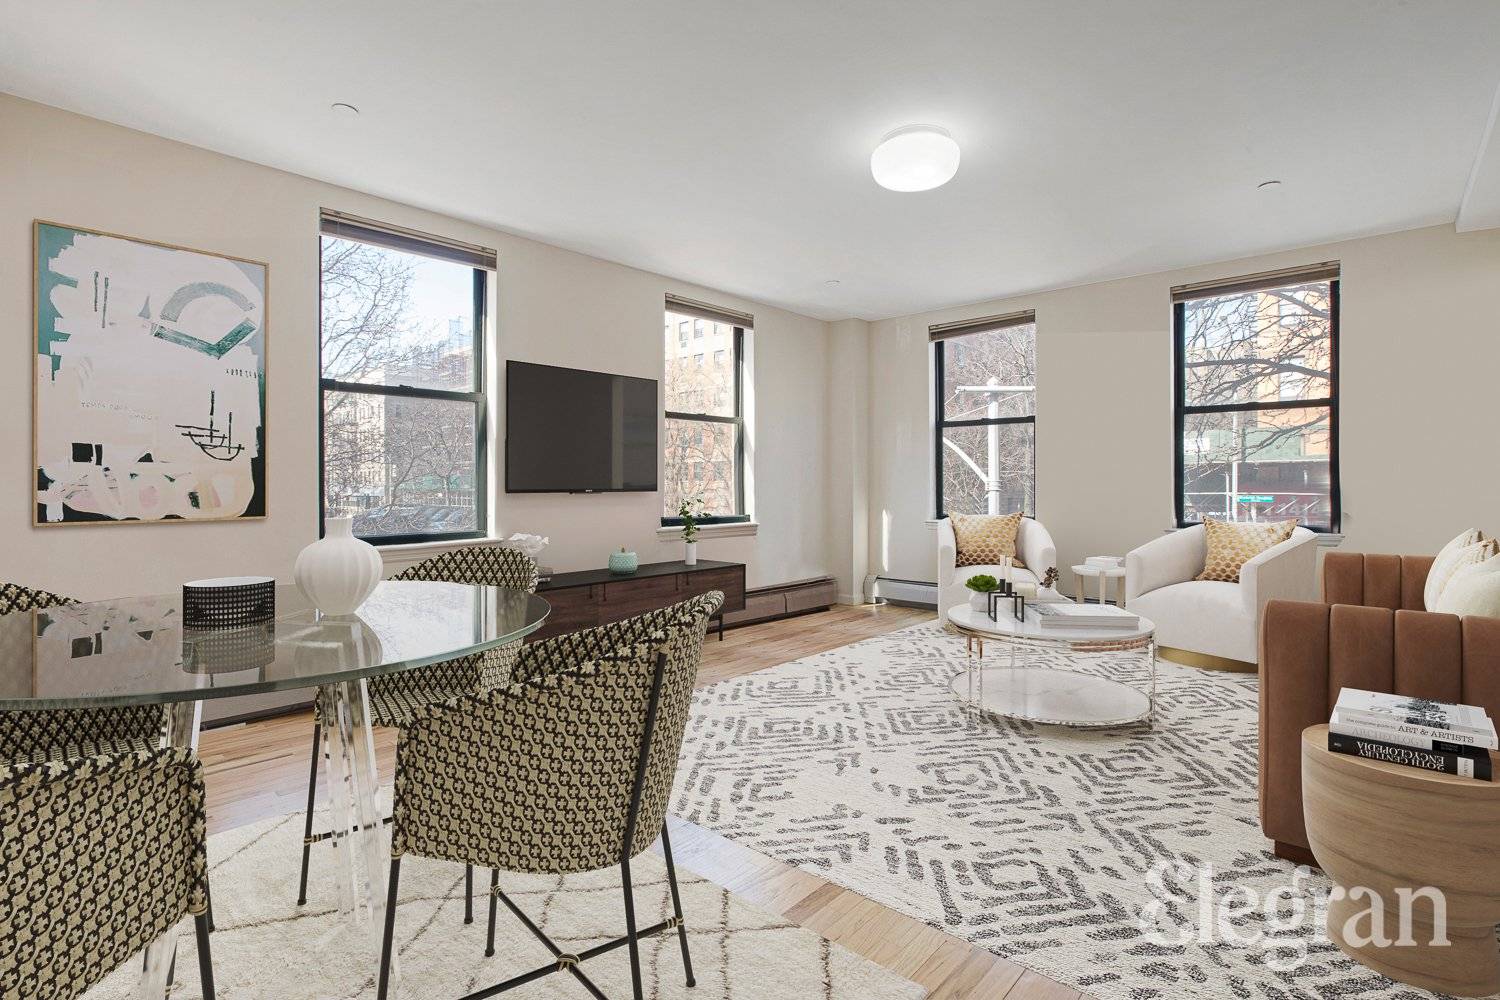 WELCOME HOME ! ! This charming 1 bed 1 bath is an HDFC Co Op apartment located in Harlem's 'The Washington', right off of Frederick Douglass Blvd and 148th St.